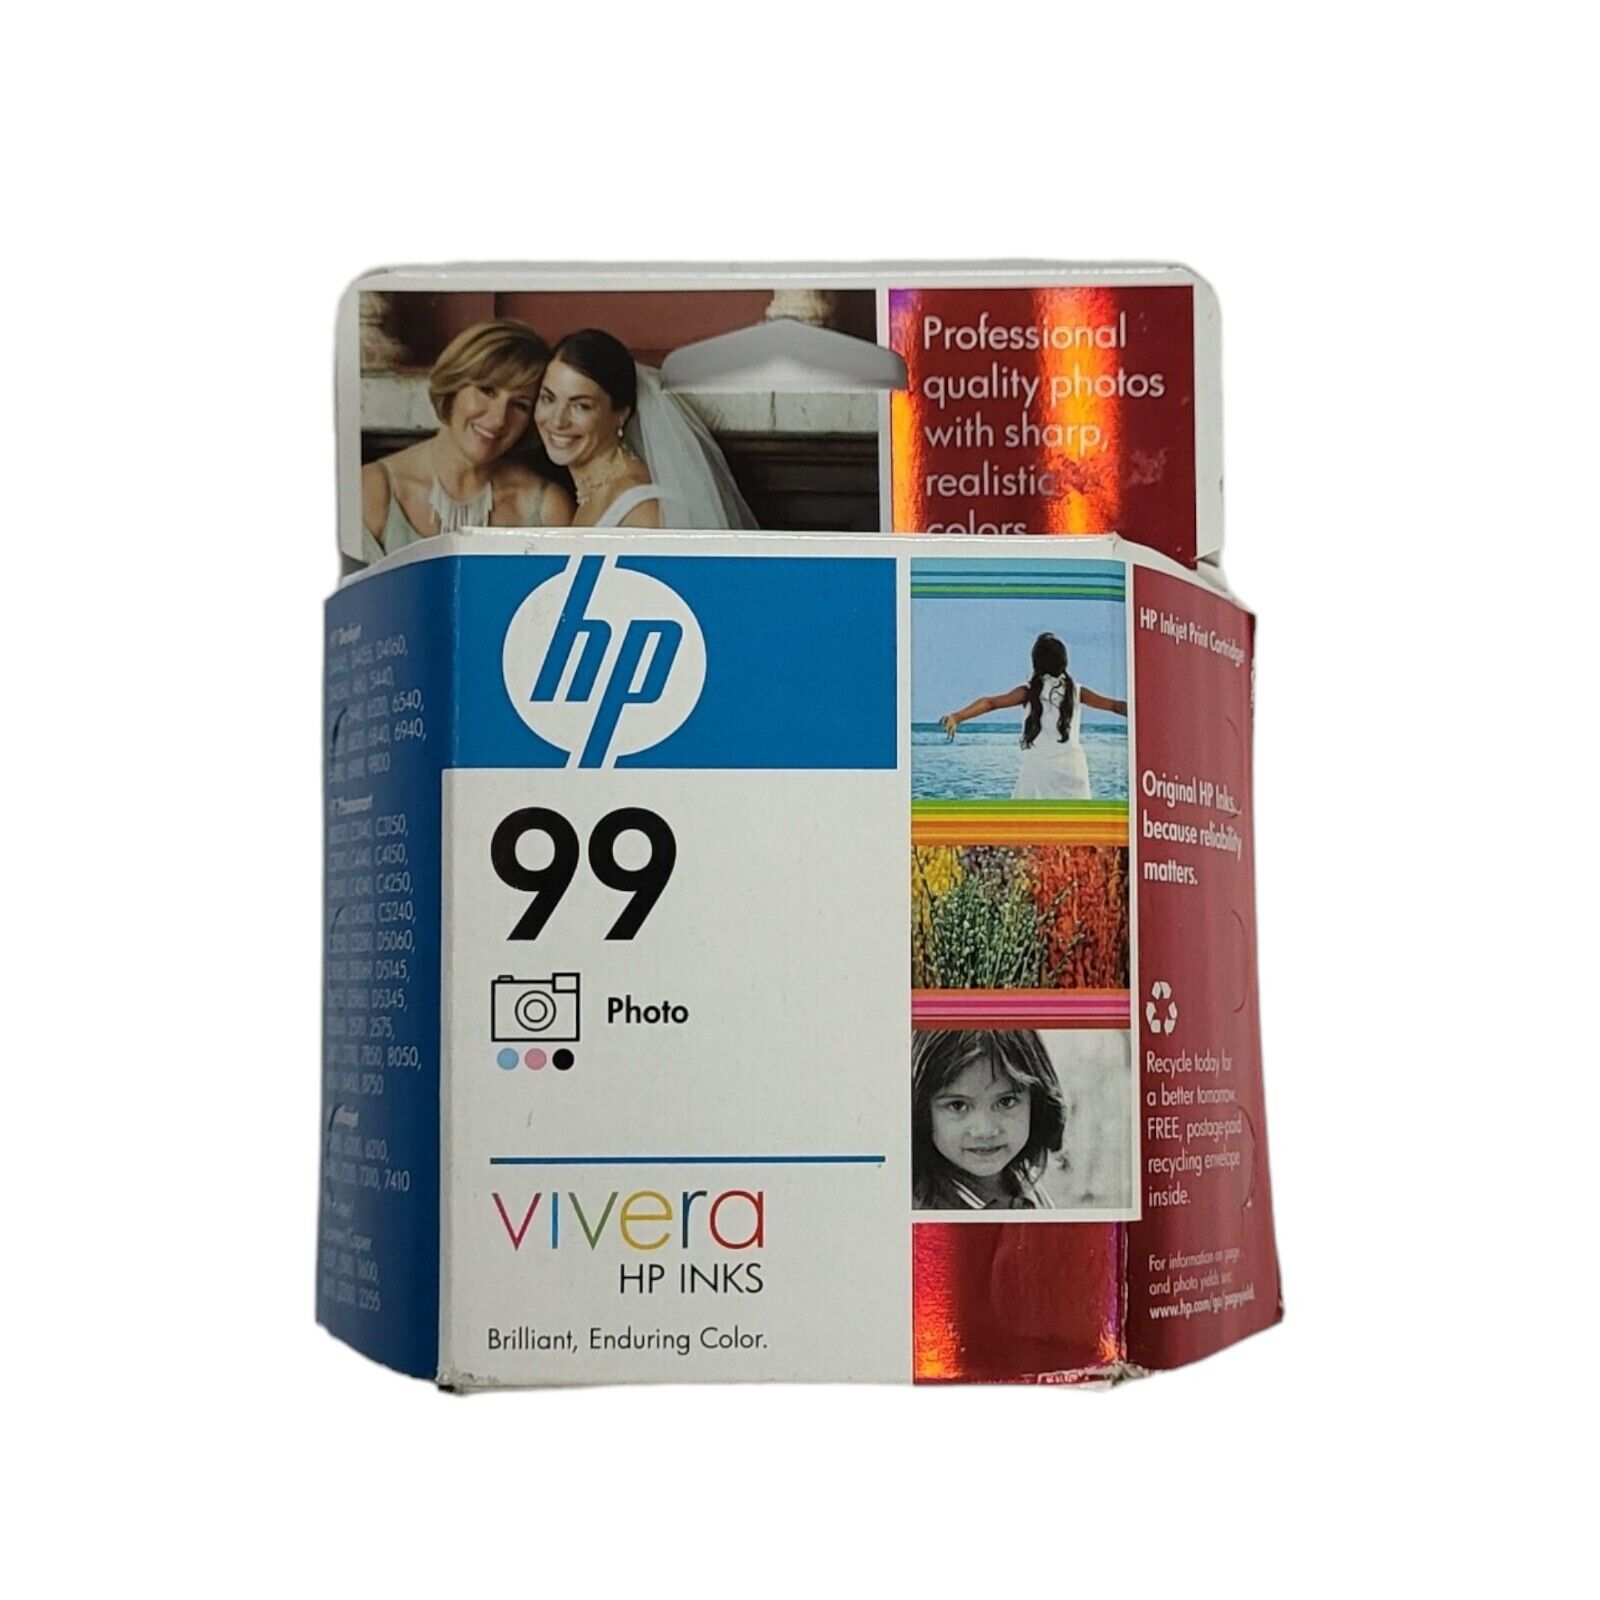 HP 99 Photo Ink Cartridge Factory Sealed Expired May 2009